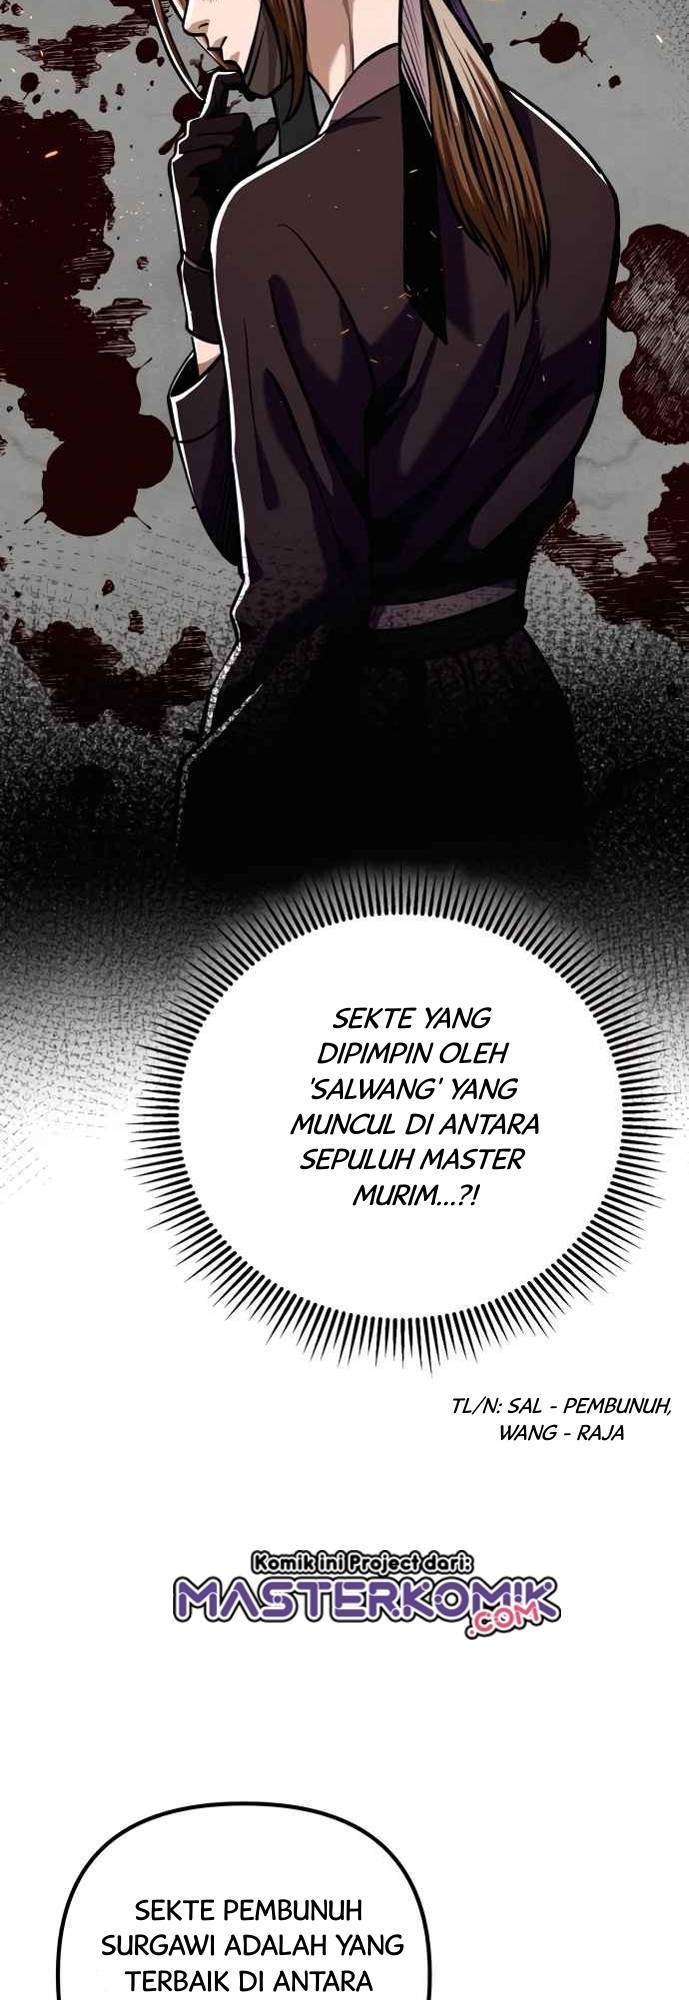 Ha Buk Paeng’s Youngest Son Chapter 7 17